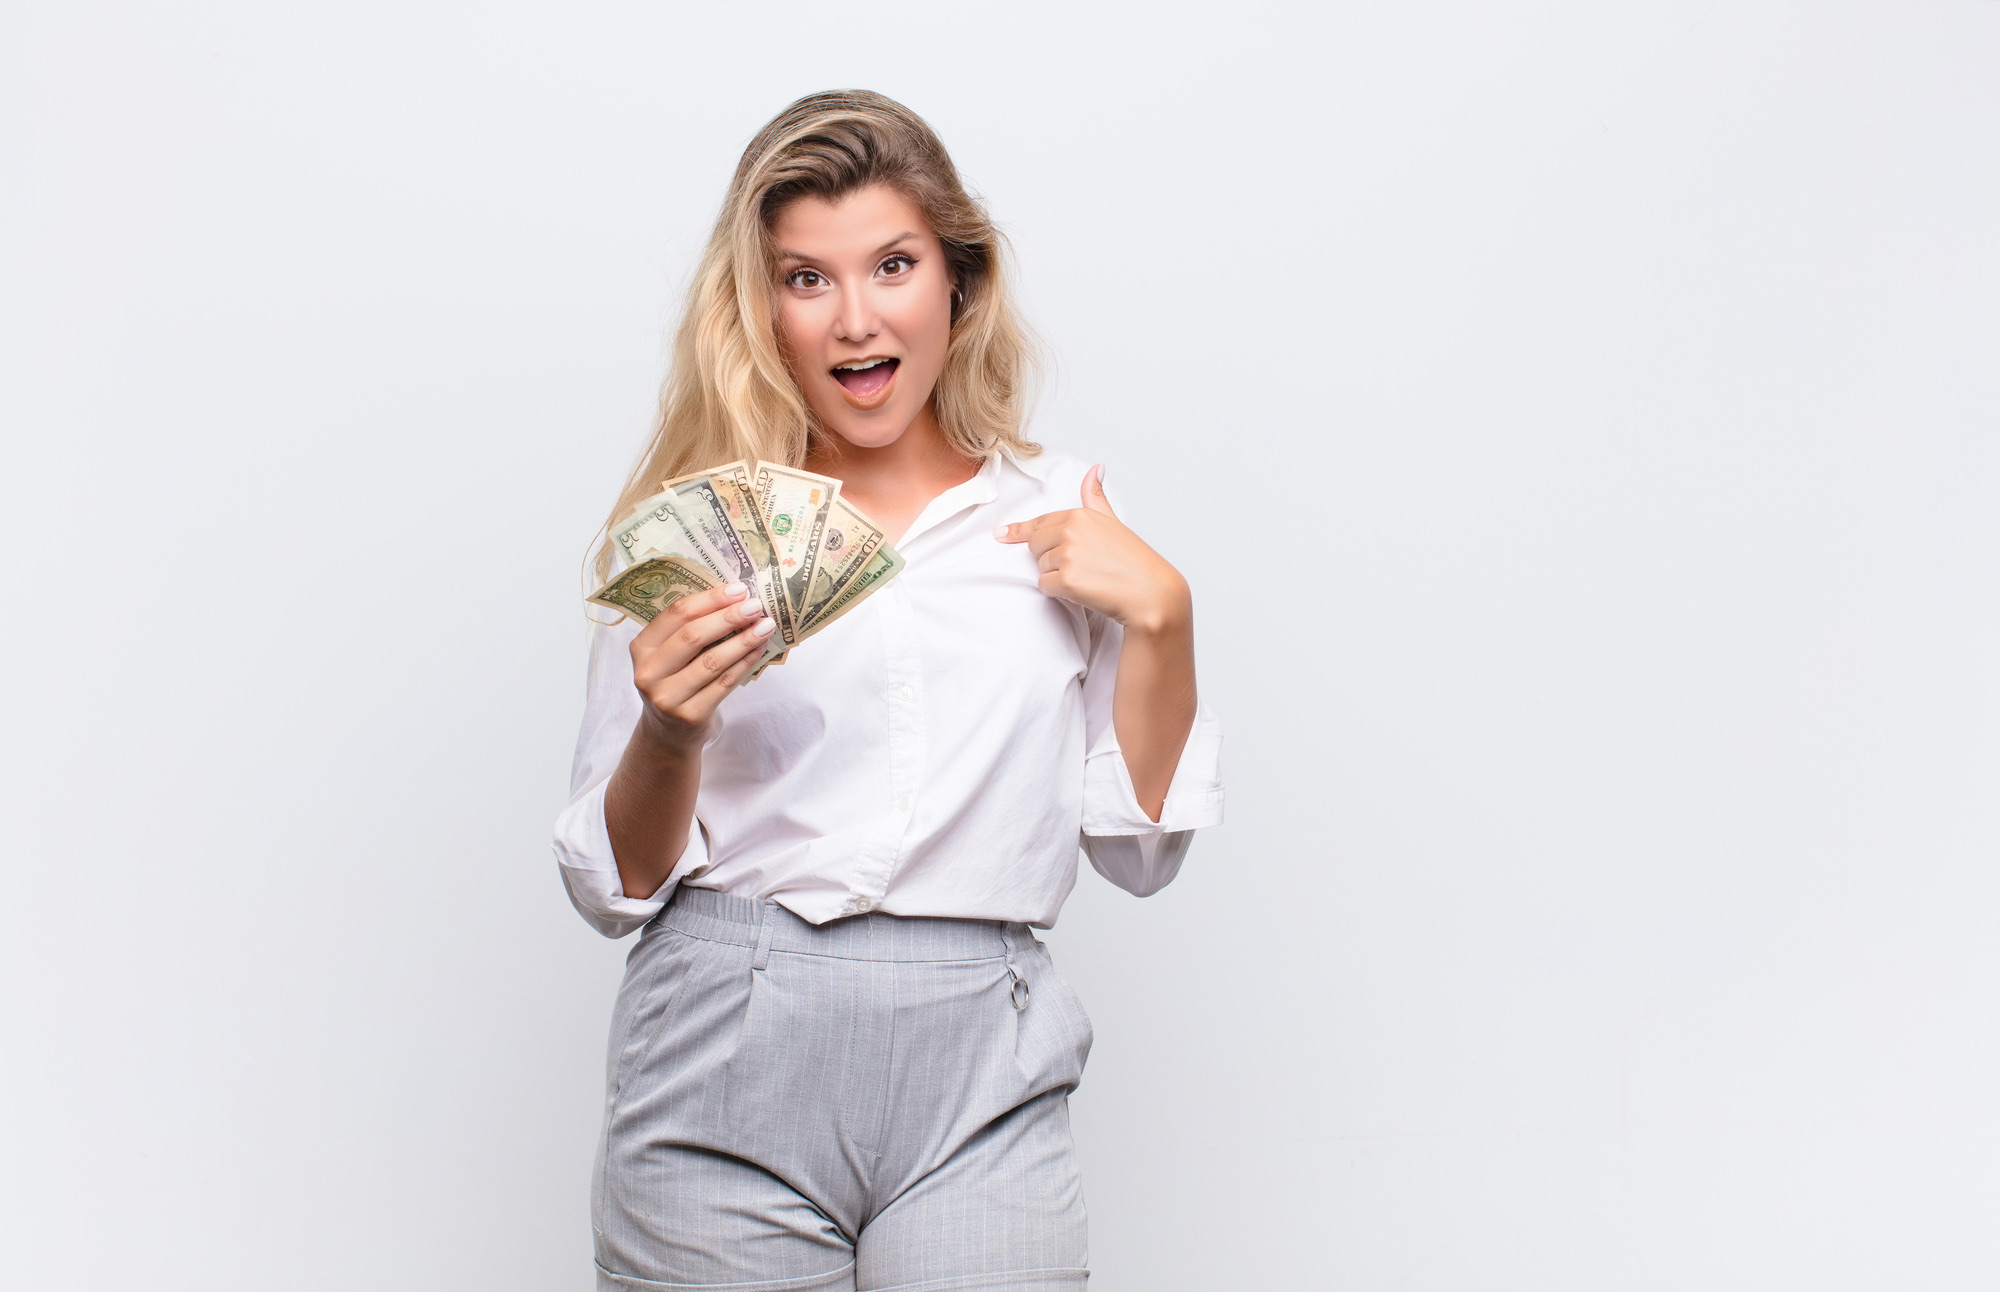 young pretty latin woman looking shocked and surprised with mouth wide open, pointing to self with dollar bills banknotes